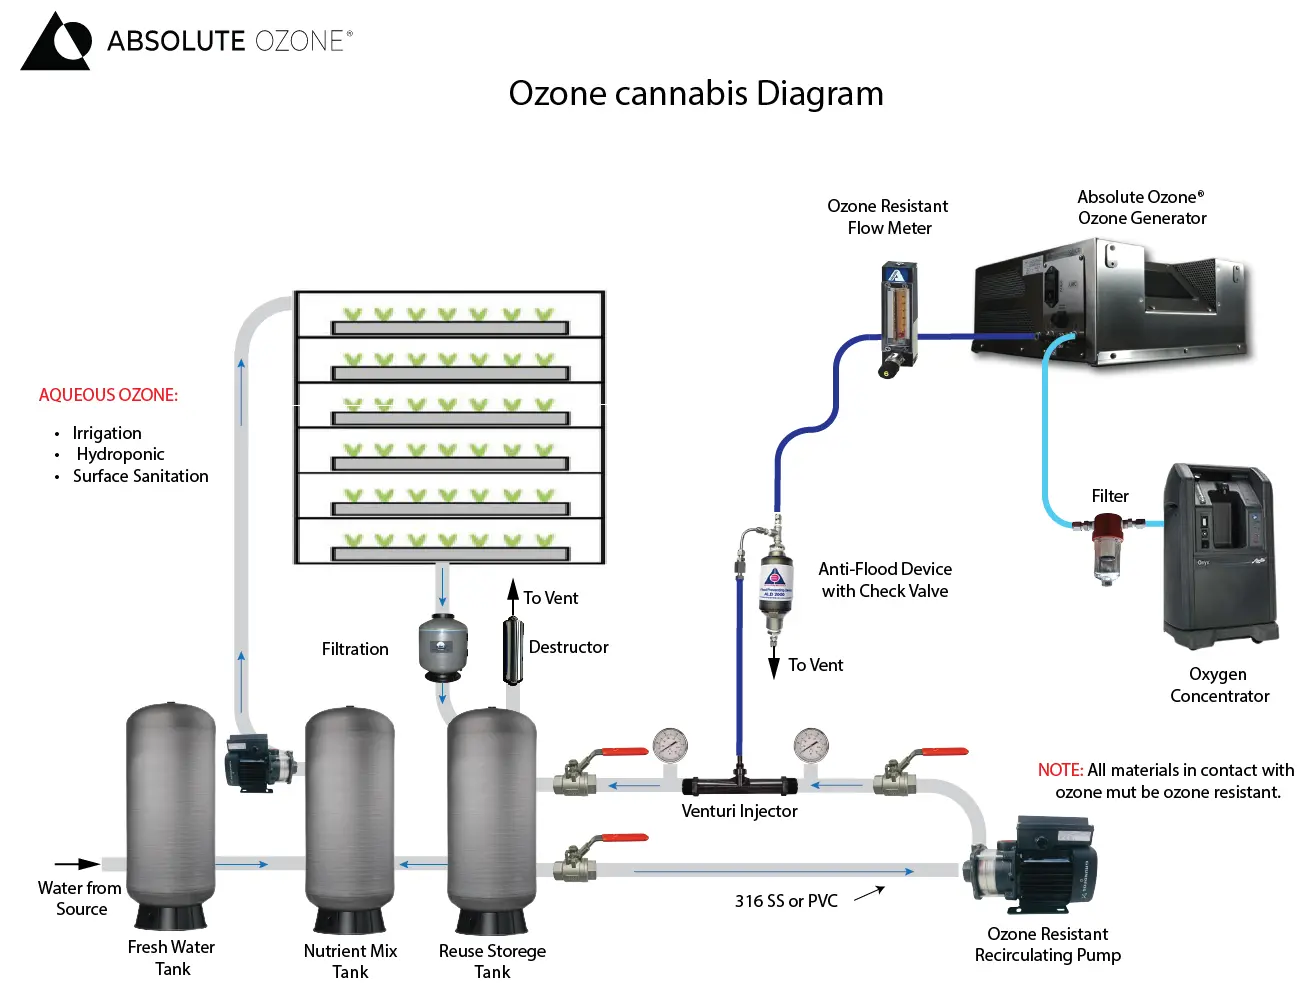 Conceptual Ozone Setup Diagram for Cannabis Irrigation Water